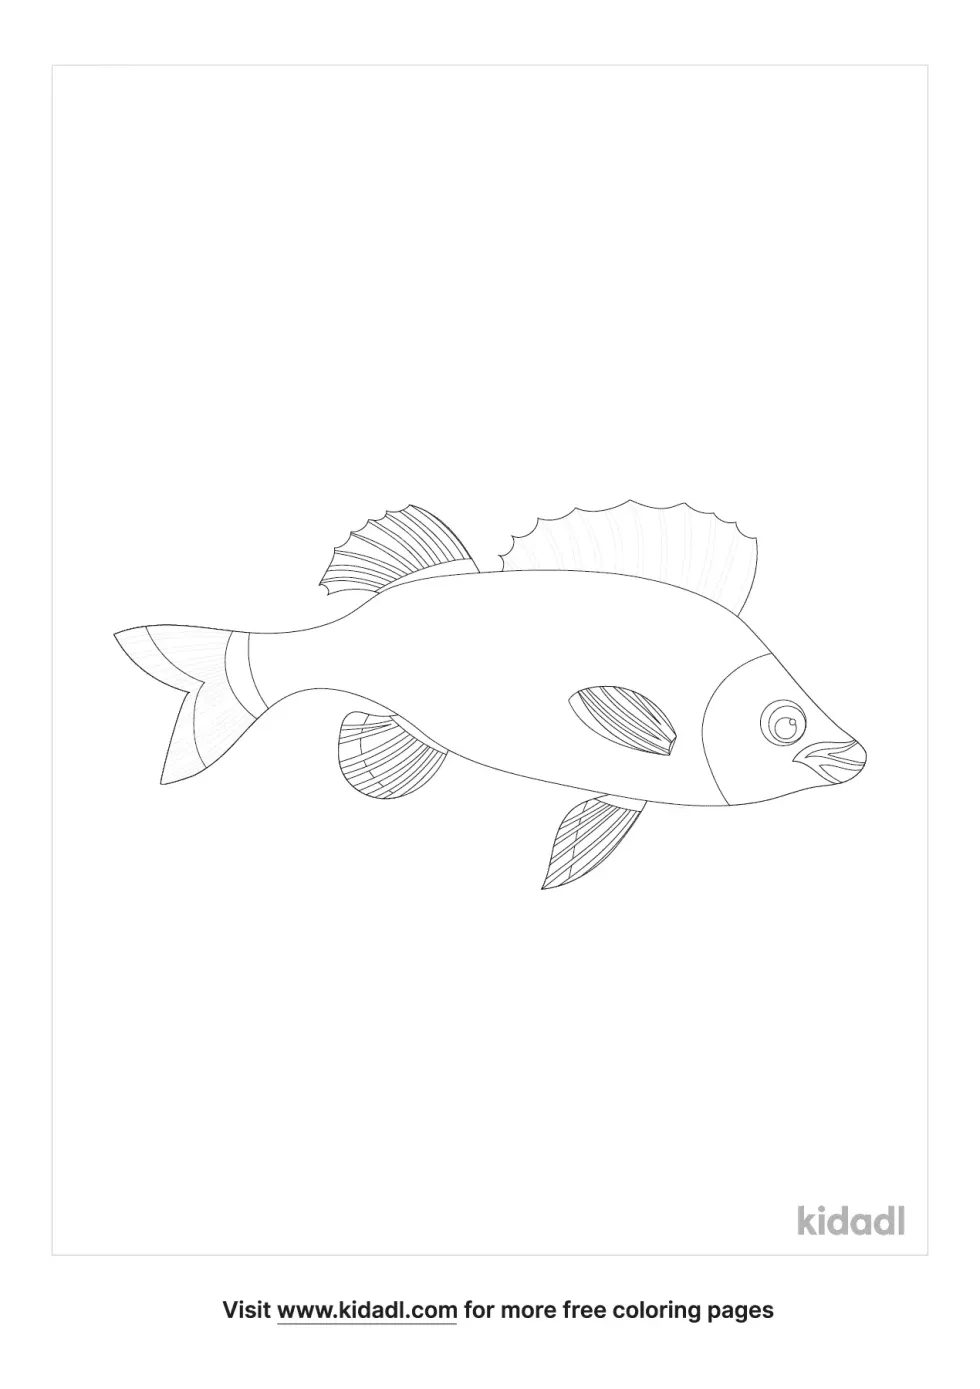 Red Bellied Piranha Coloring Page